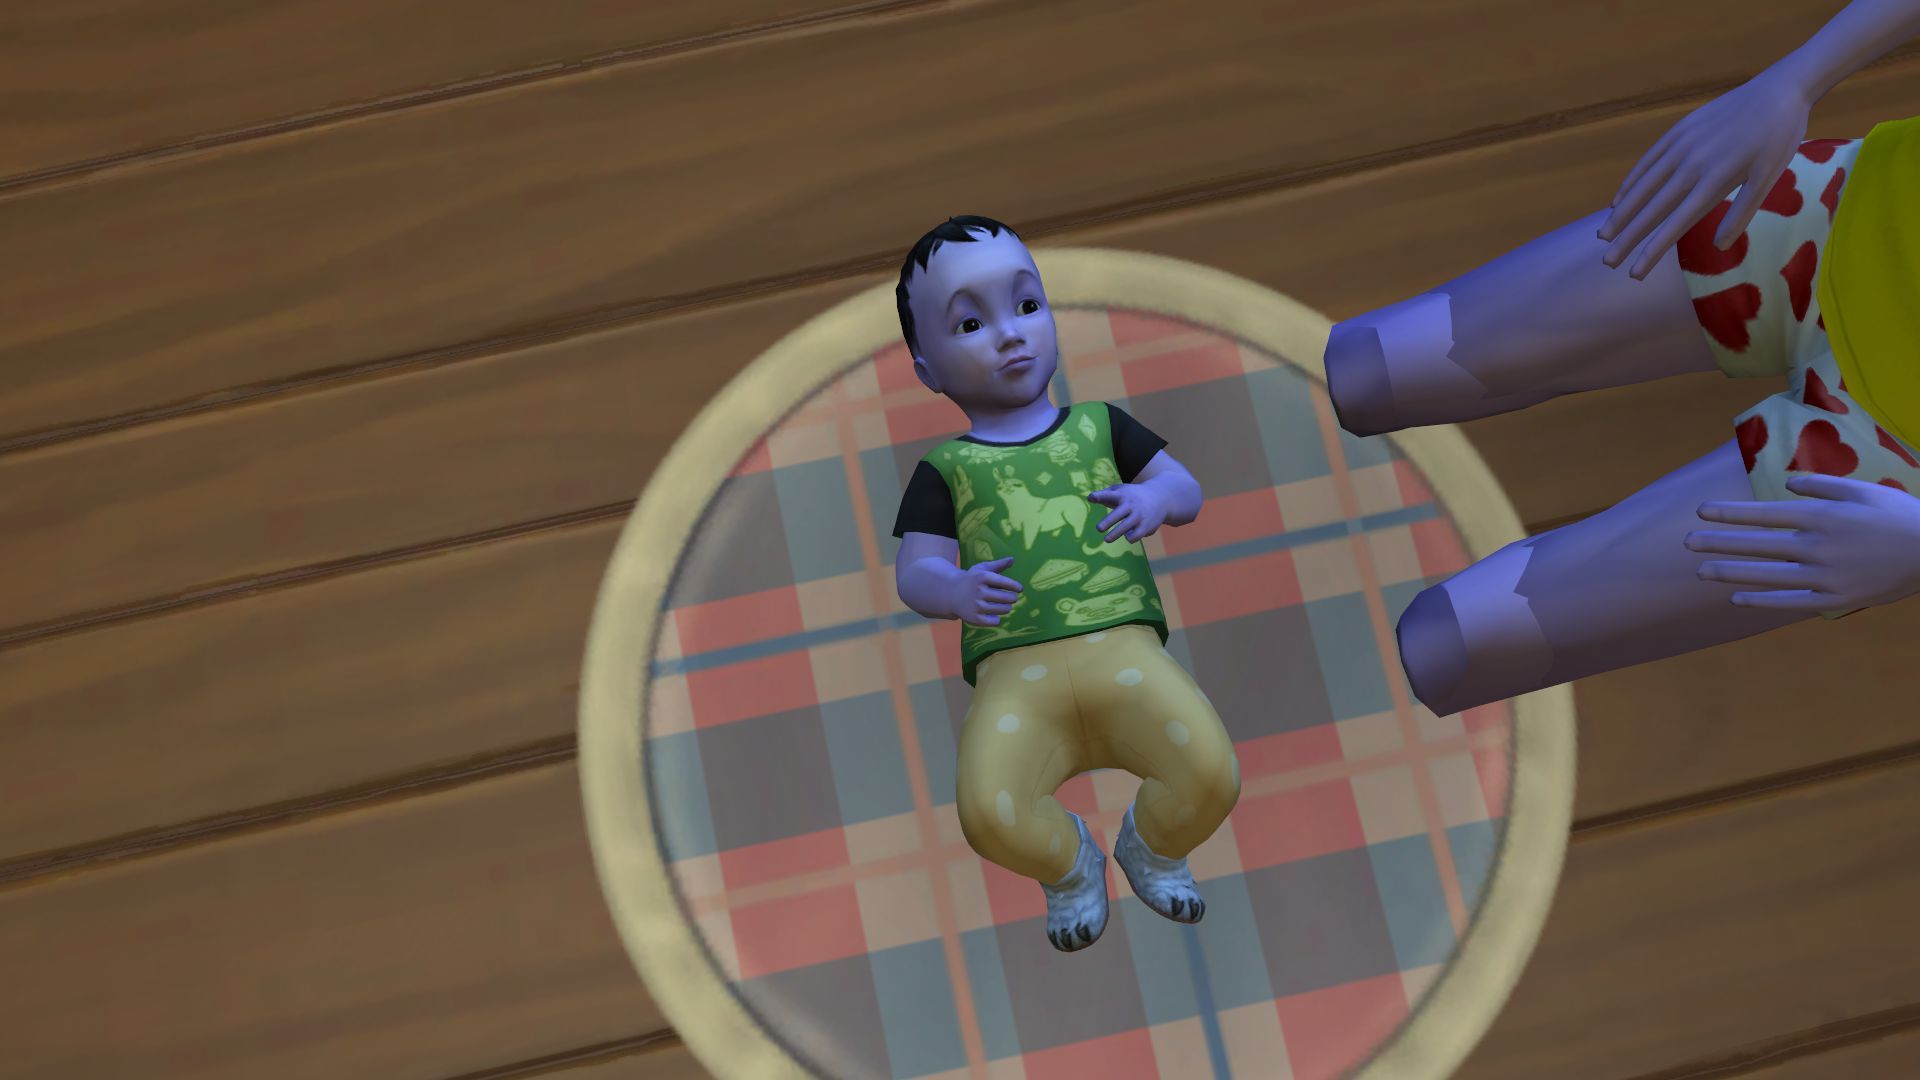 An alien hybrid baby from Sims 4, with purple skin and dark hair.